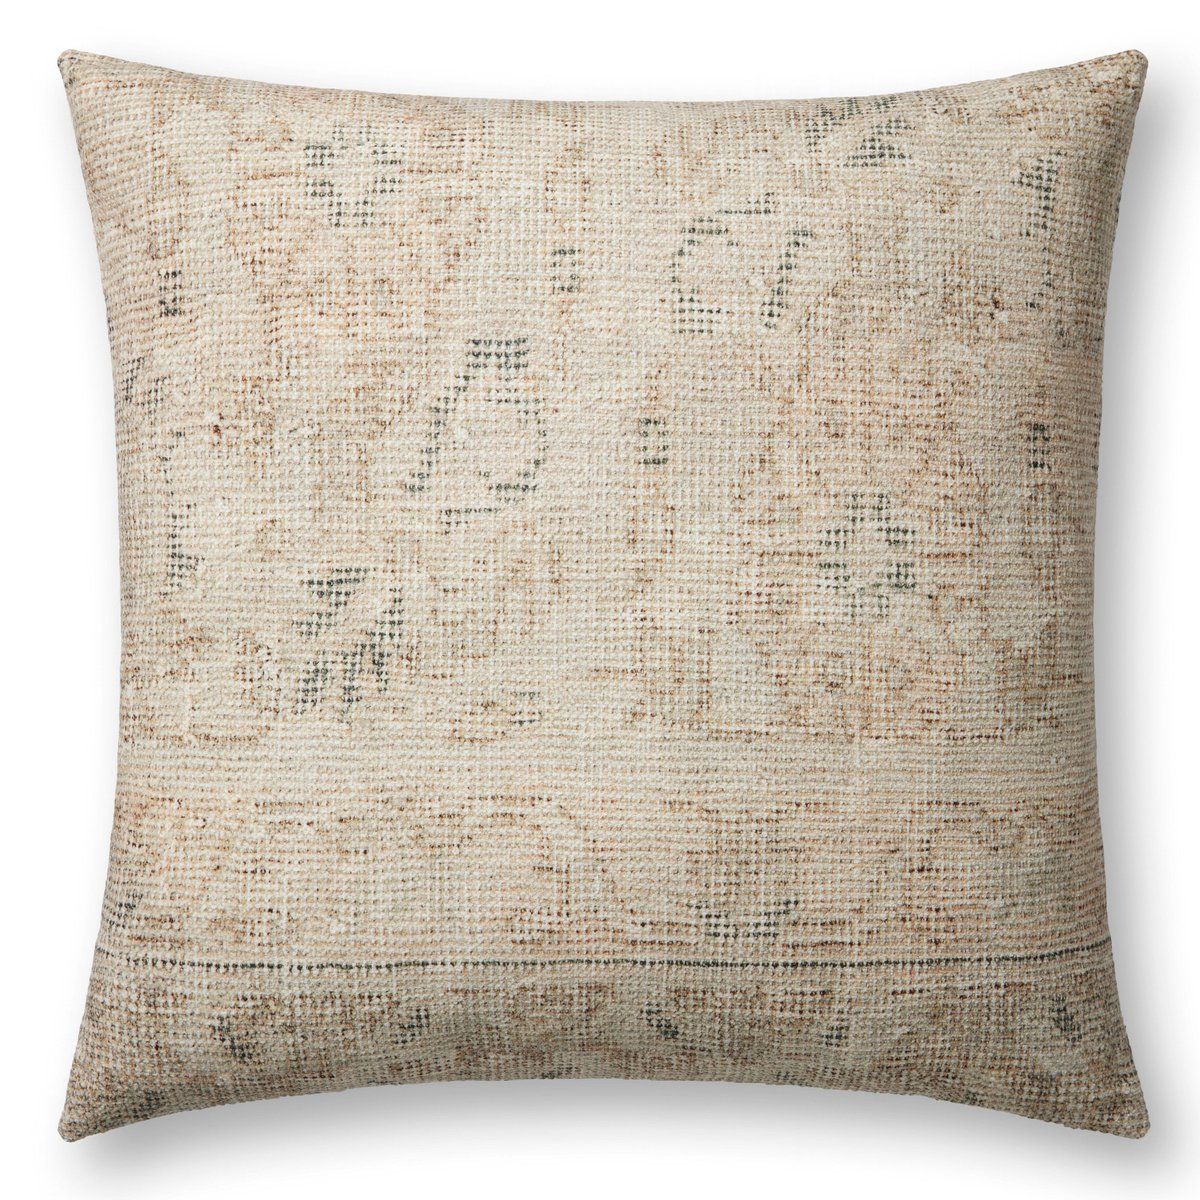 Amber Lewis x Loloi Celestia Pillow PAL-0042 Vintage / Overdyed Pillow | Rugs Direct | Rugs Direct